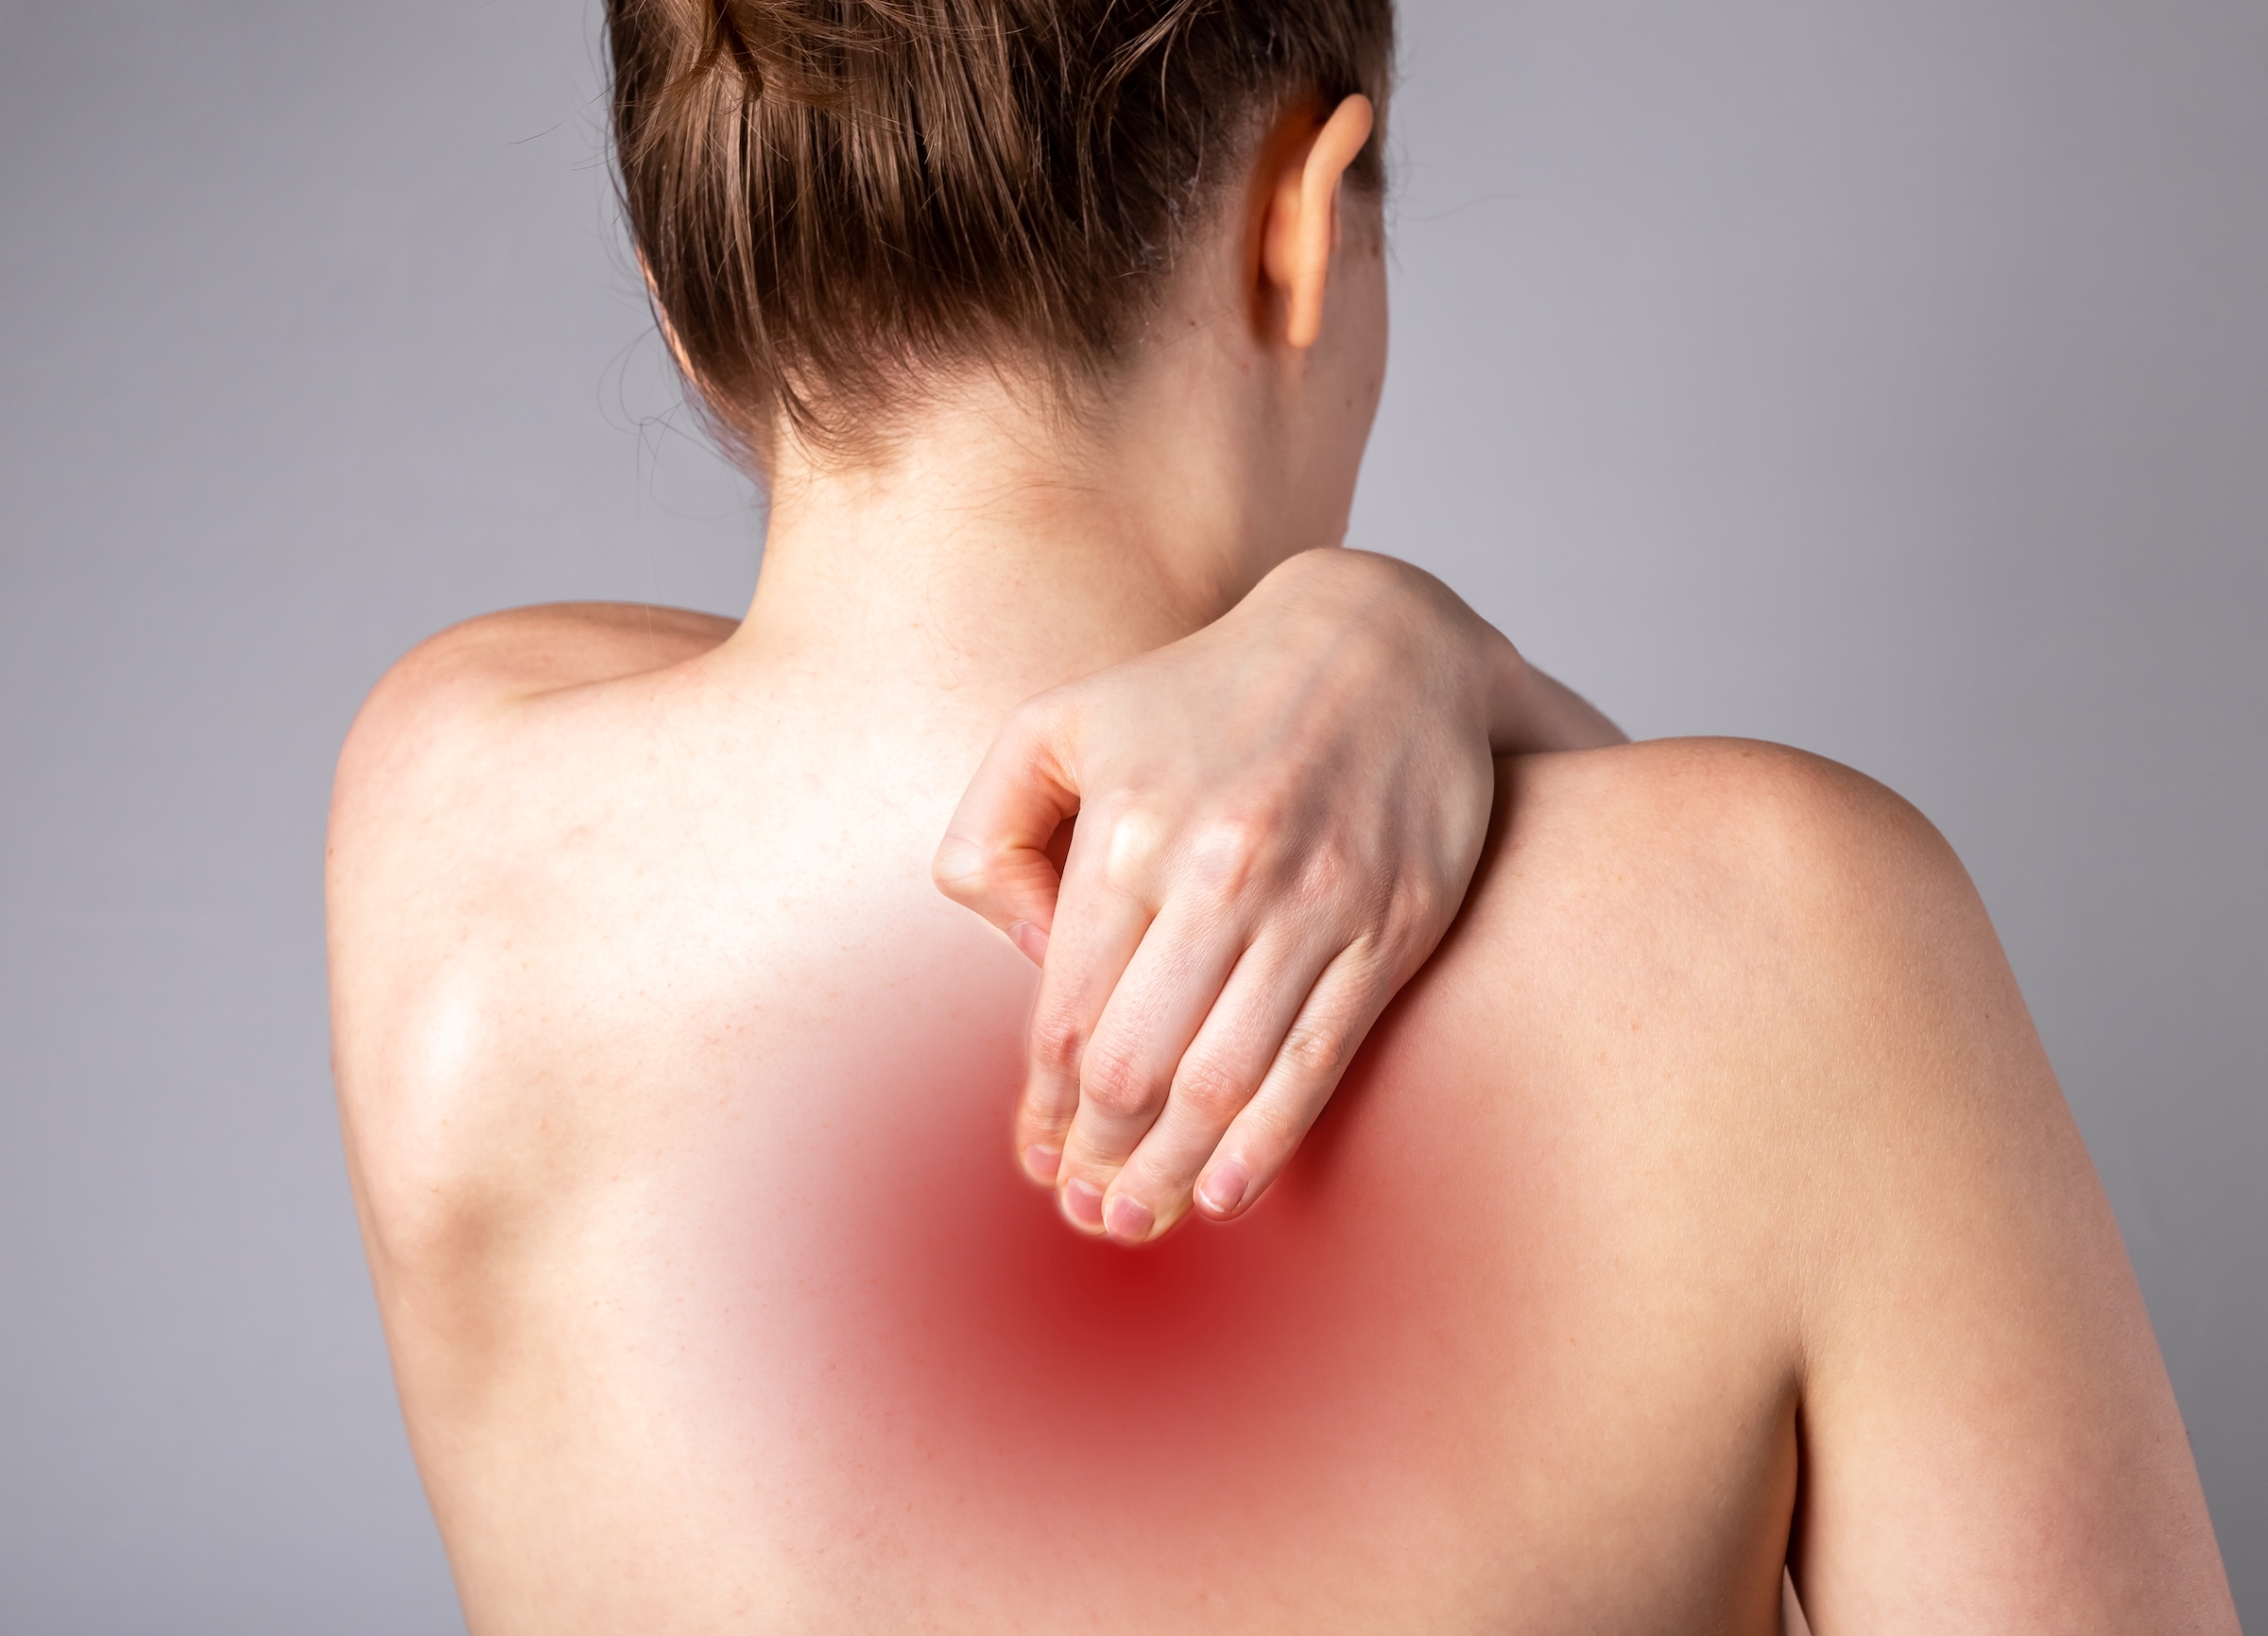 Pinched Shoulder Blade: Causes, Symptoms, Treatments, and Exercises